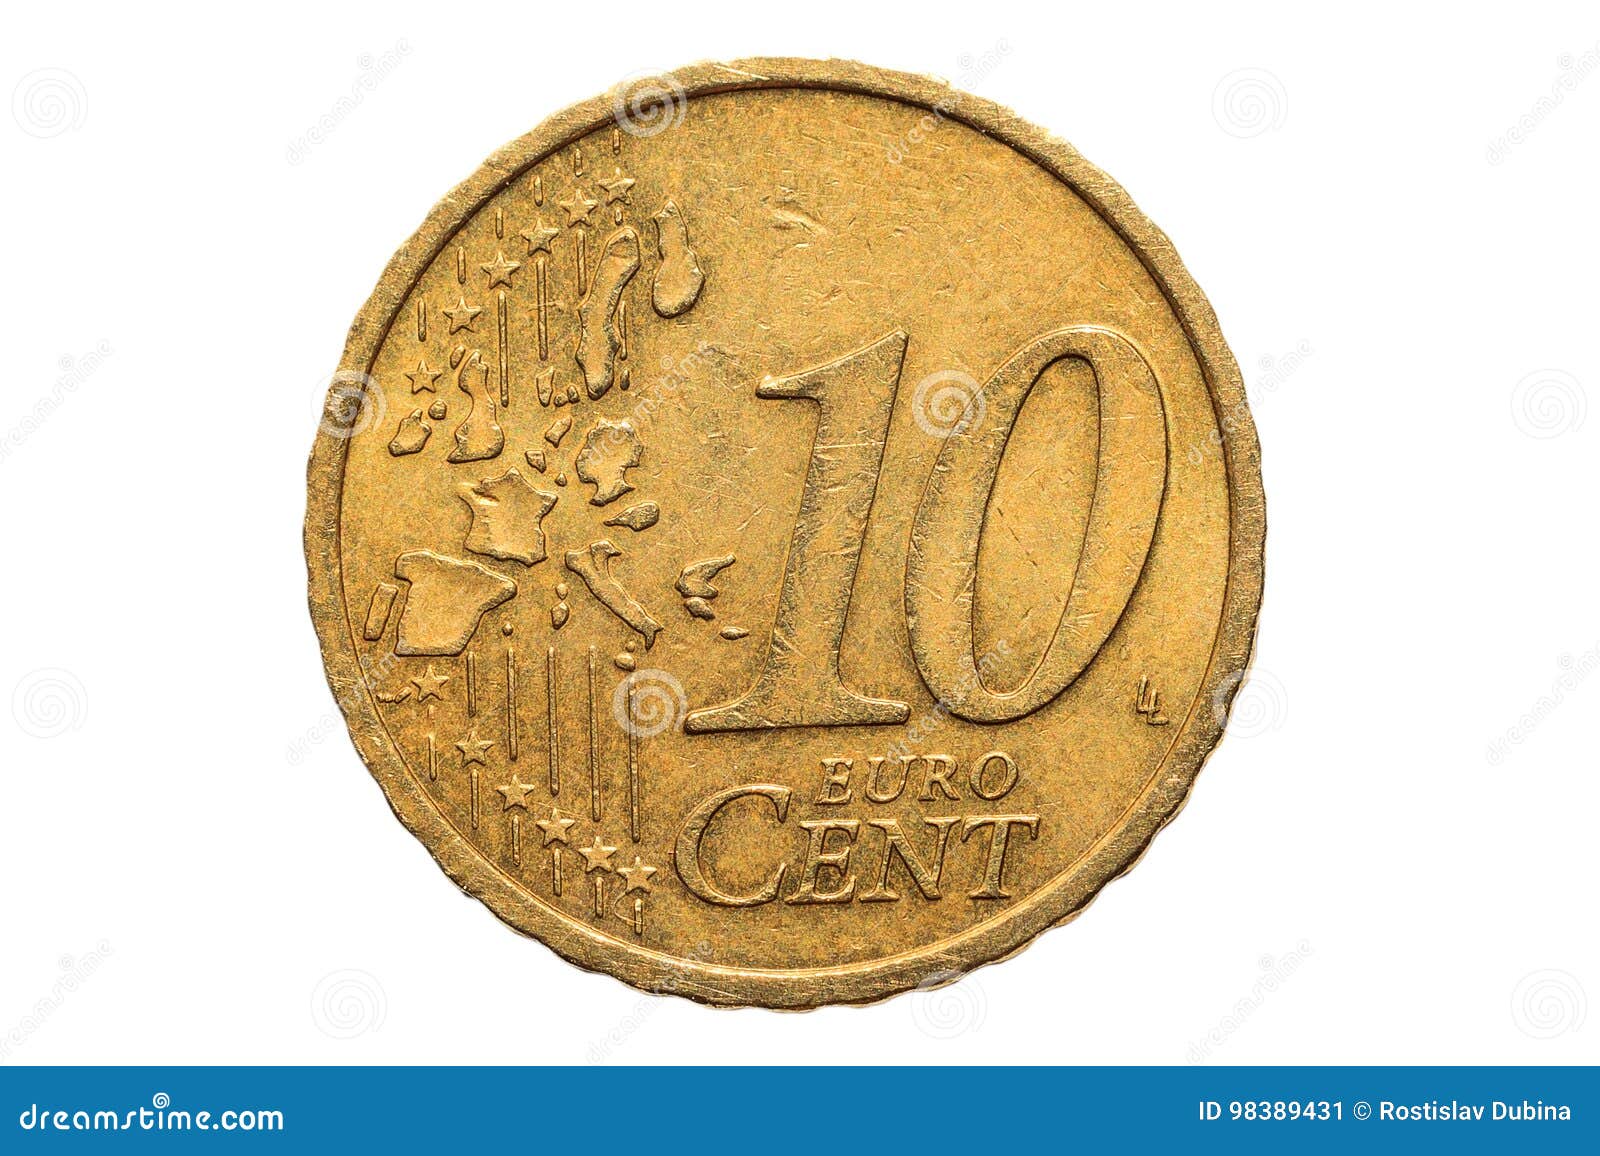 european coin with a nominal value of ten euro cents  on white background. macro picture of european coins.